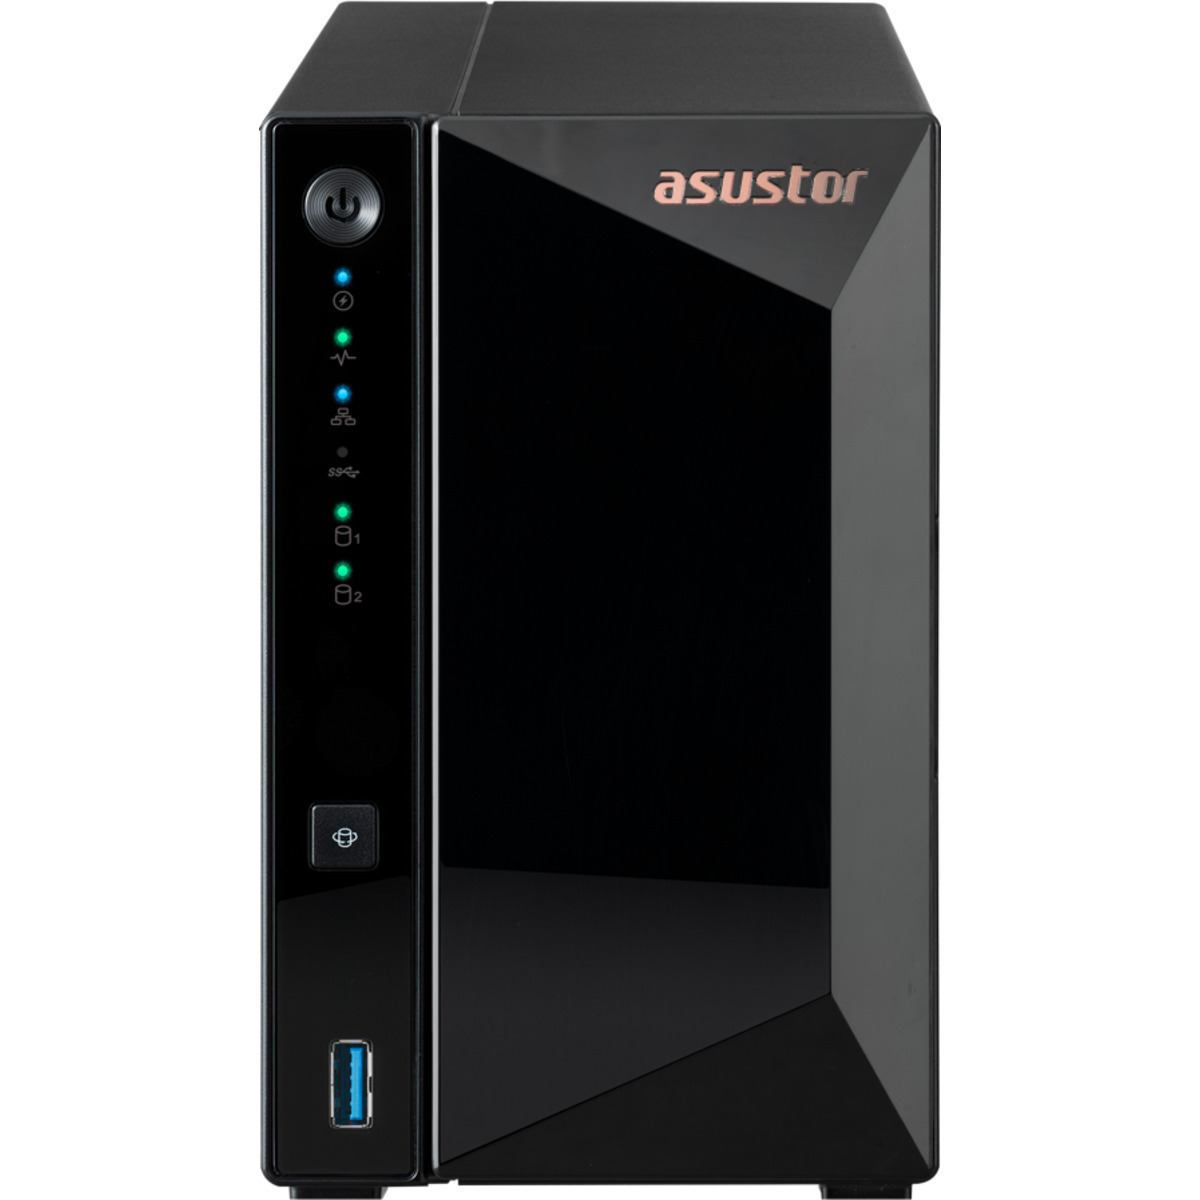 ASUSTOR DRIVESTOR 2 Pro Gen2 AS3302T v2 12tb 2-Bay Desktop Personal / Basic Home / Small Office NAS - Network Attached Storage Device 2x6tb Western Digital Red Plus WD60EFPX 3.5 5640rpm SATA 6Gb/s HDD NAS Class Drives Installed - Burn-In Tested - ON SALE DRIVESTOR 2 Pro Gen2 AS3302T v2